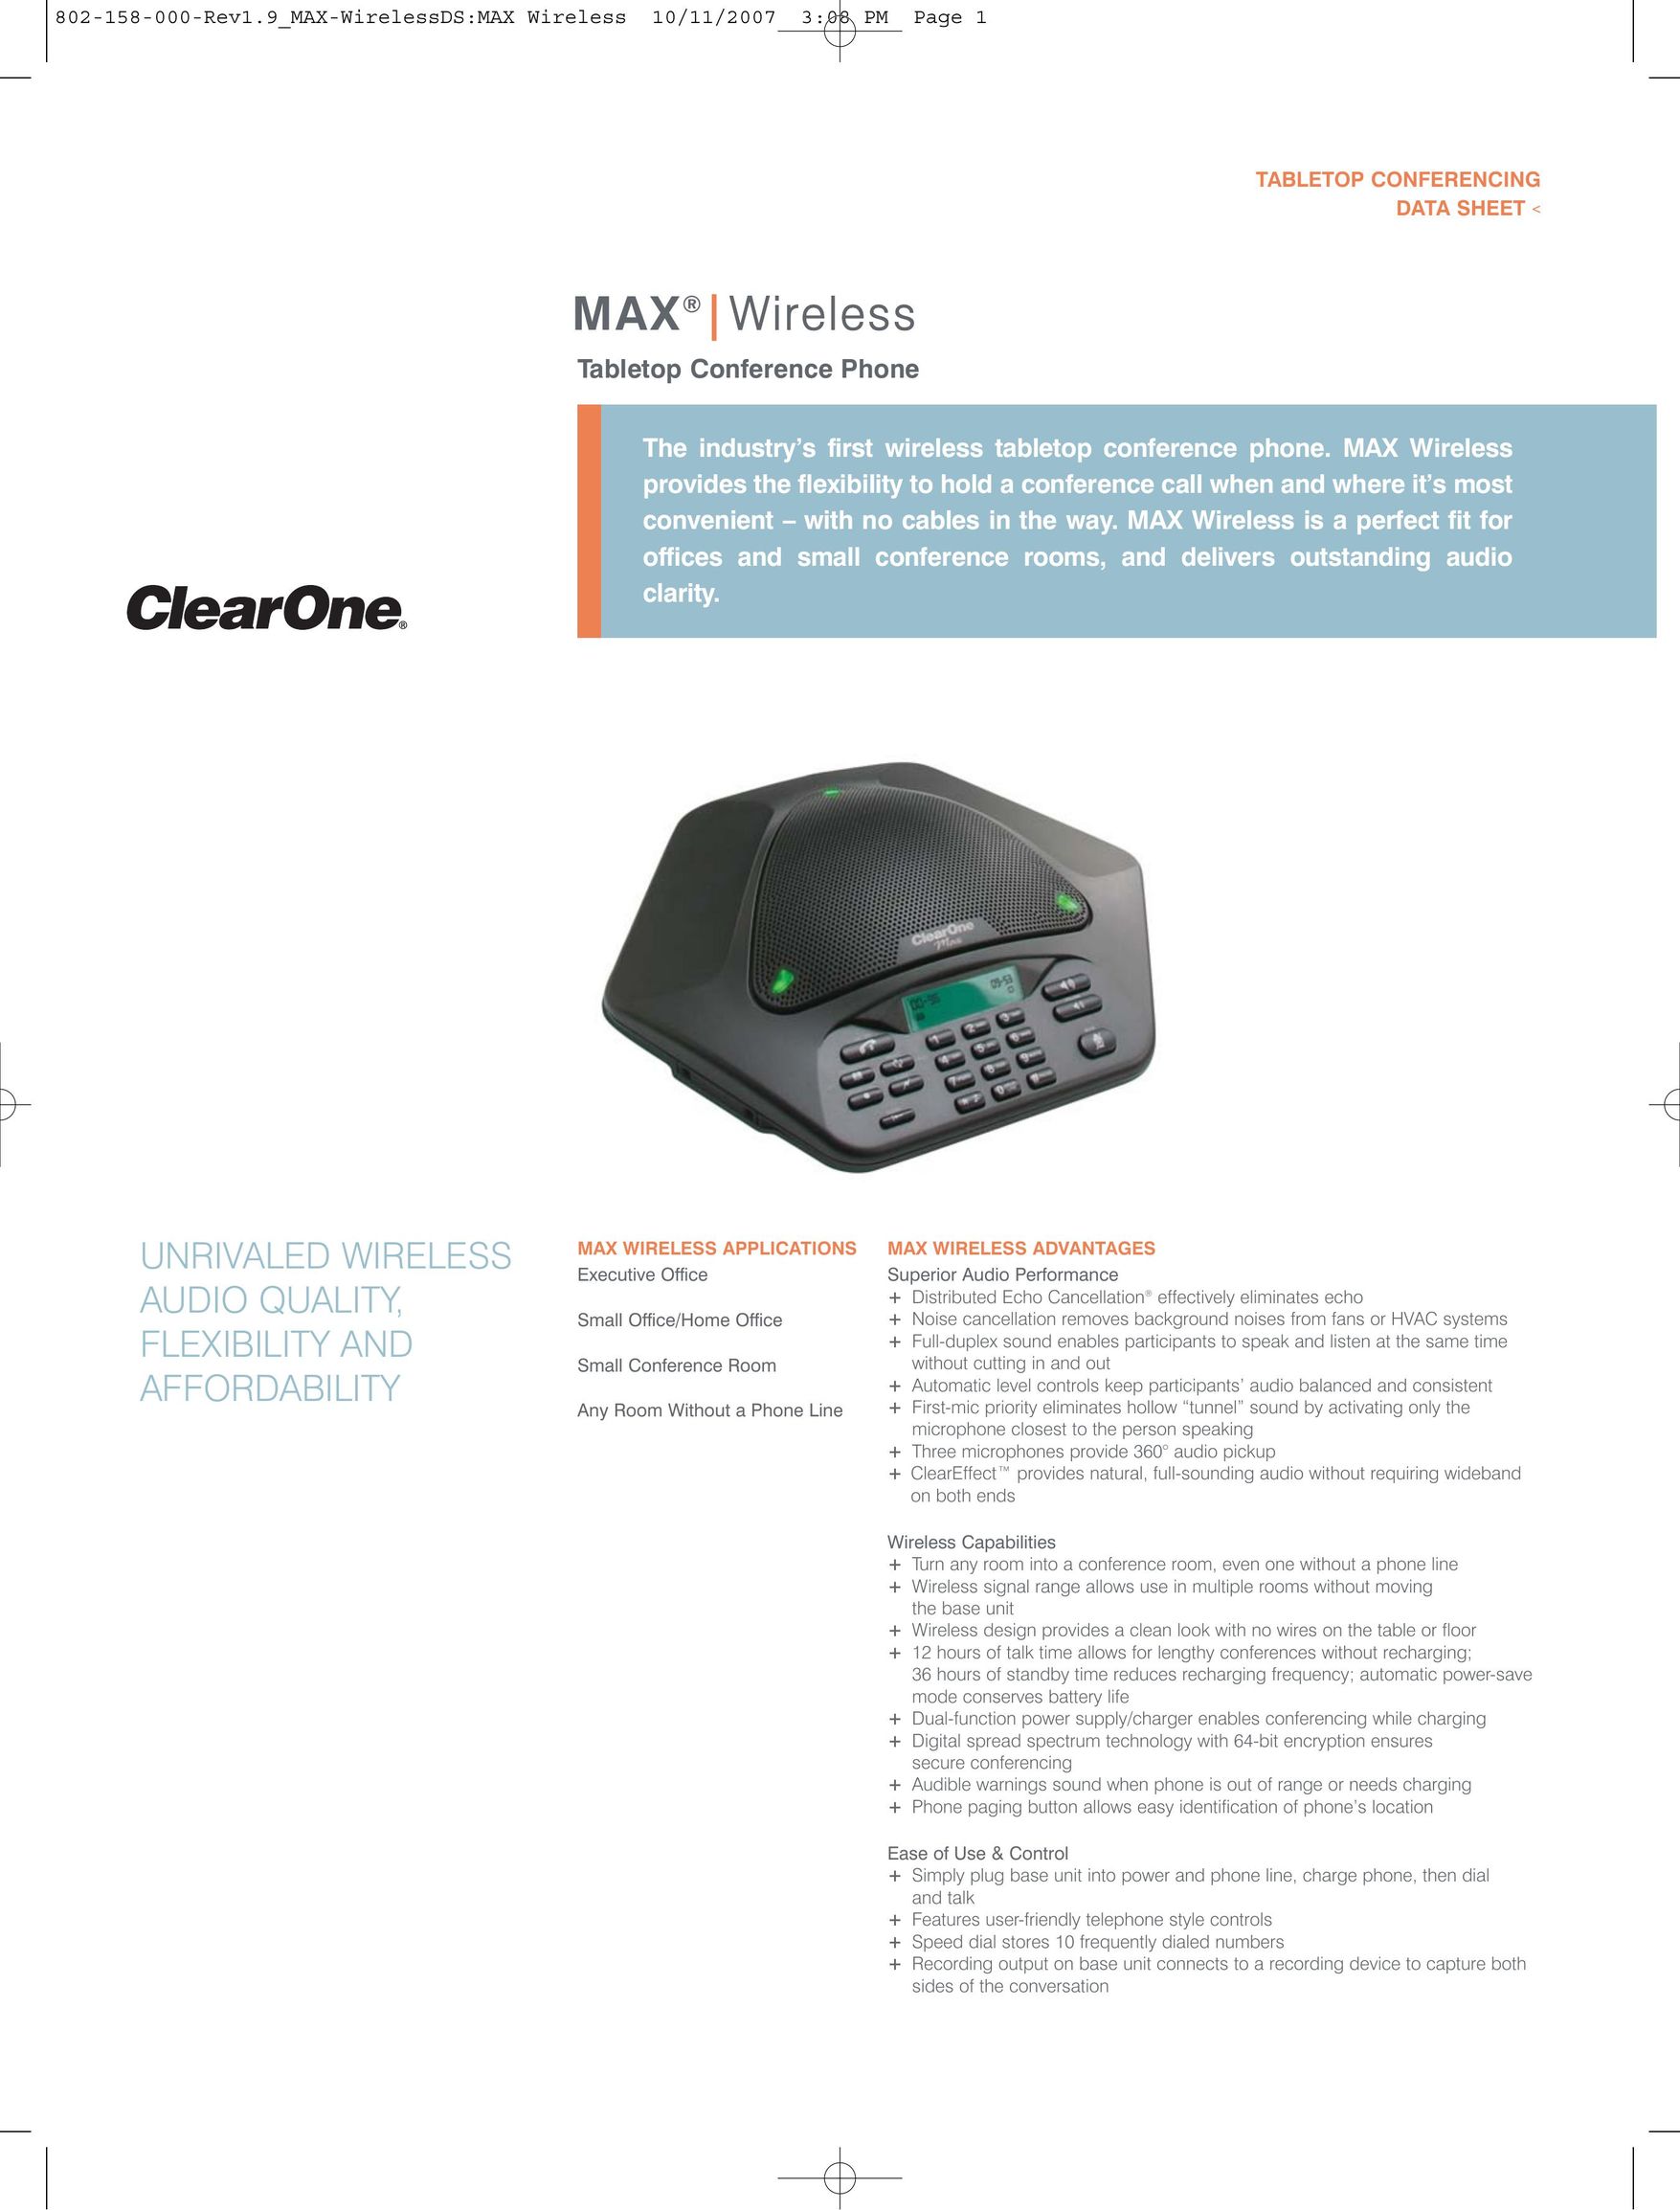 ClearOne comm 910-158-008 Conference Phone User Manual